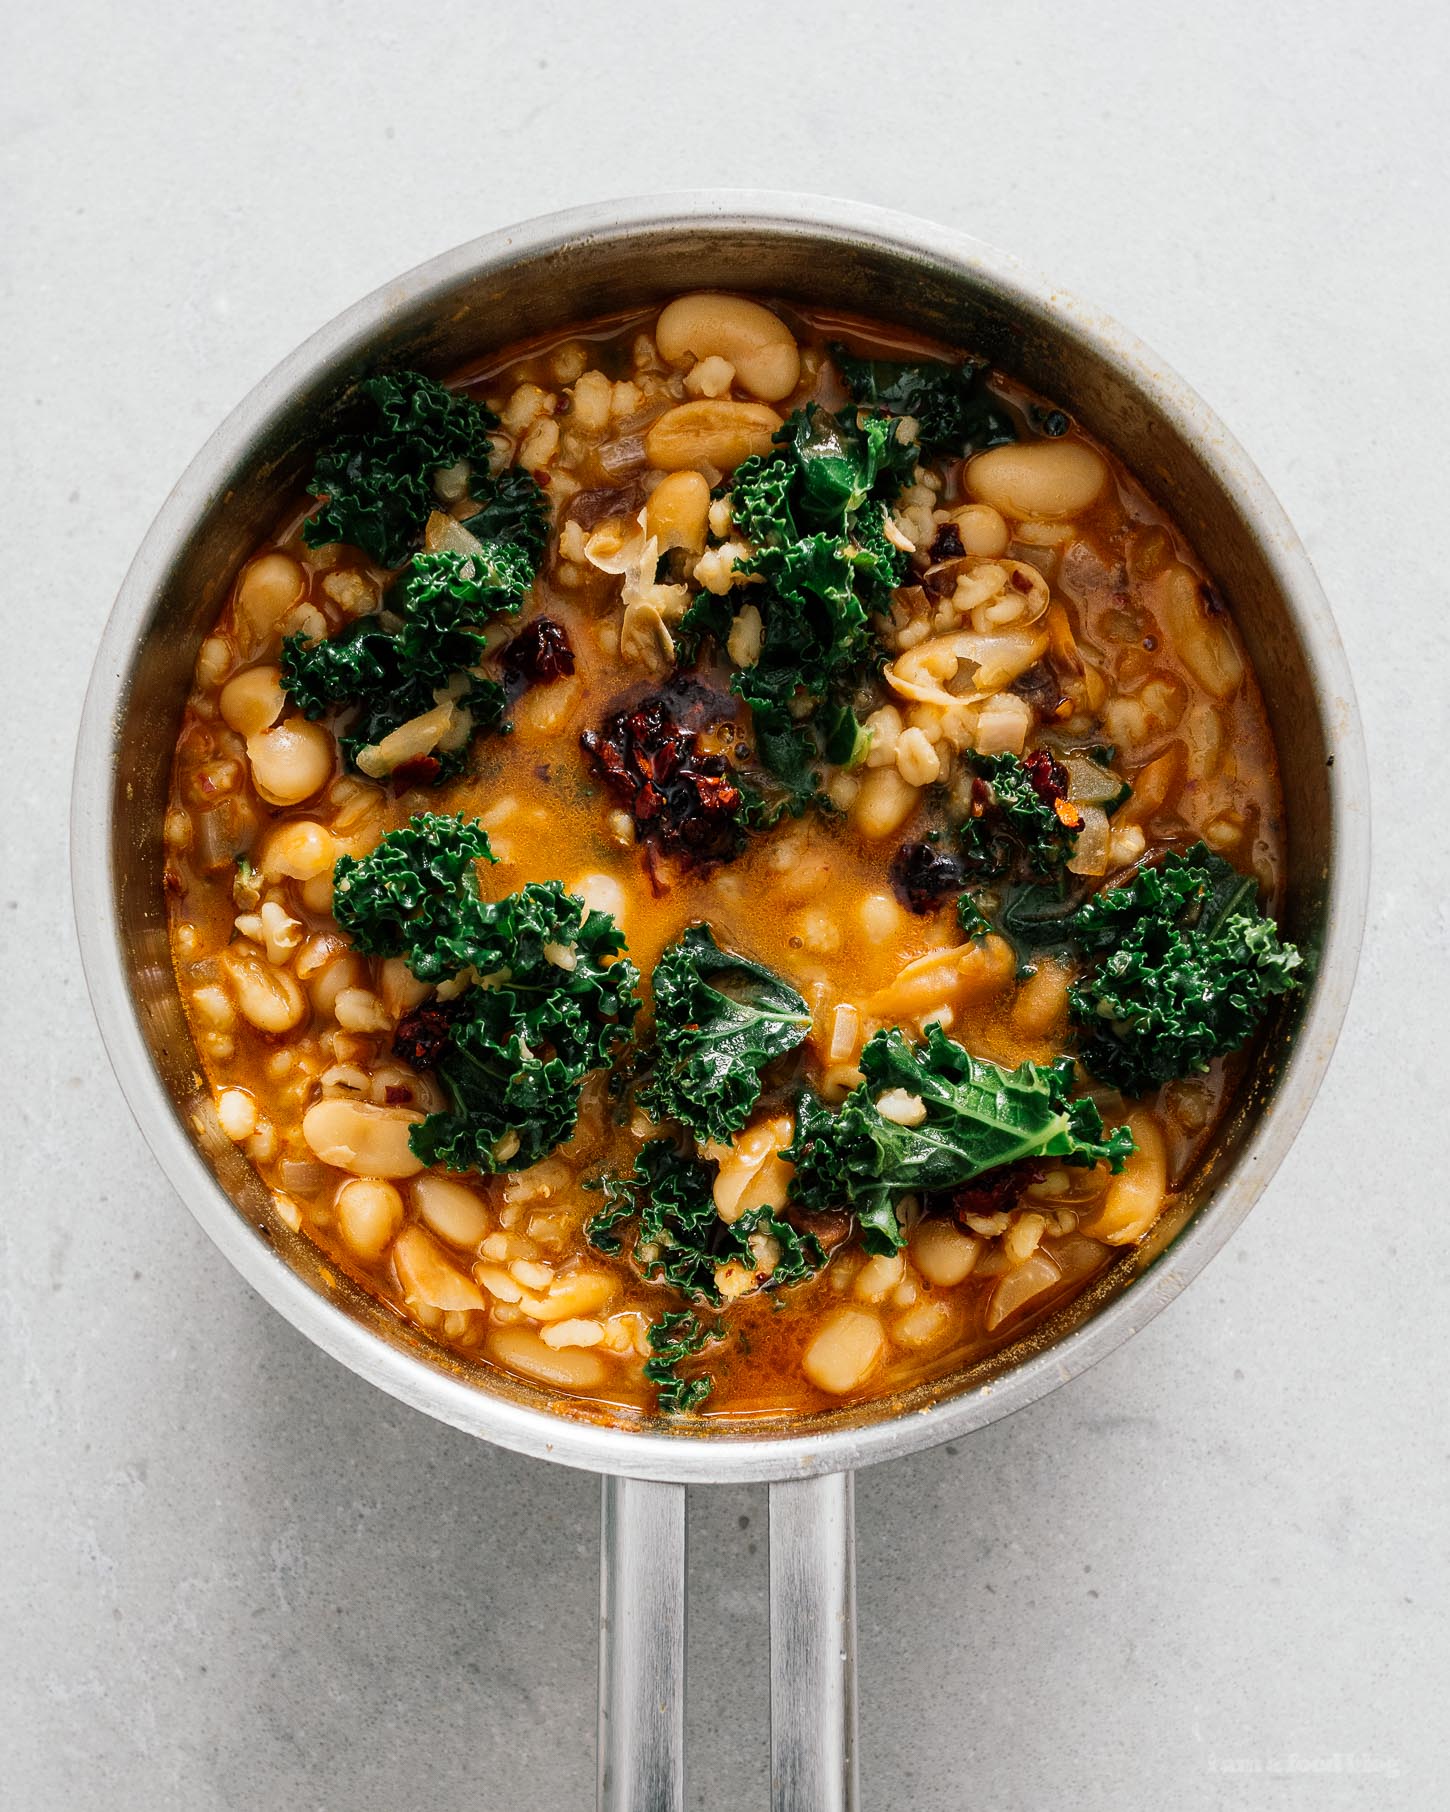 Spicy Chili Crisp White Bean and Barley Stew with Kale and Eggs | www.iamafoodblog.com